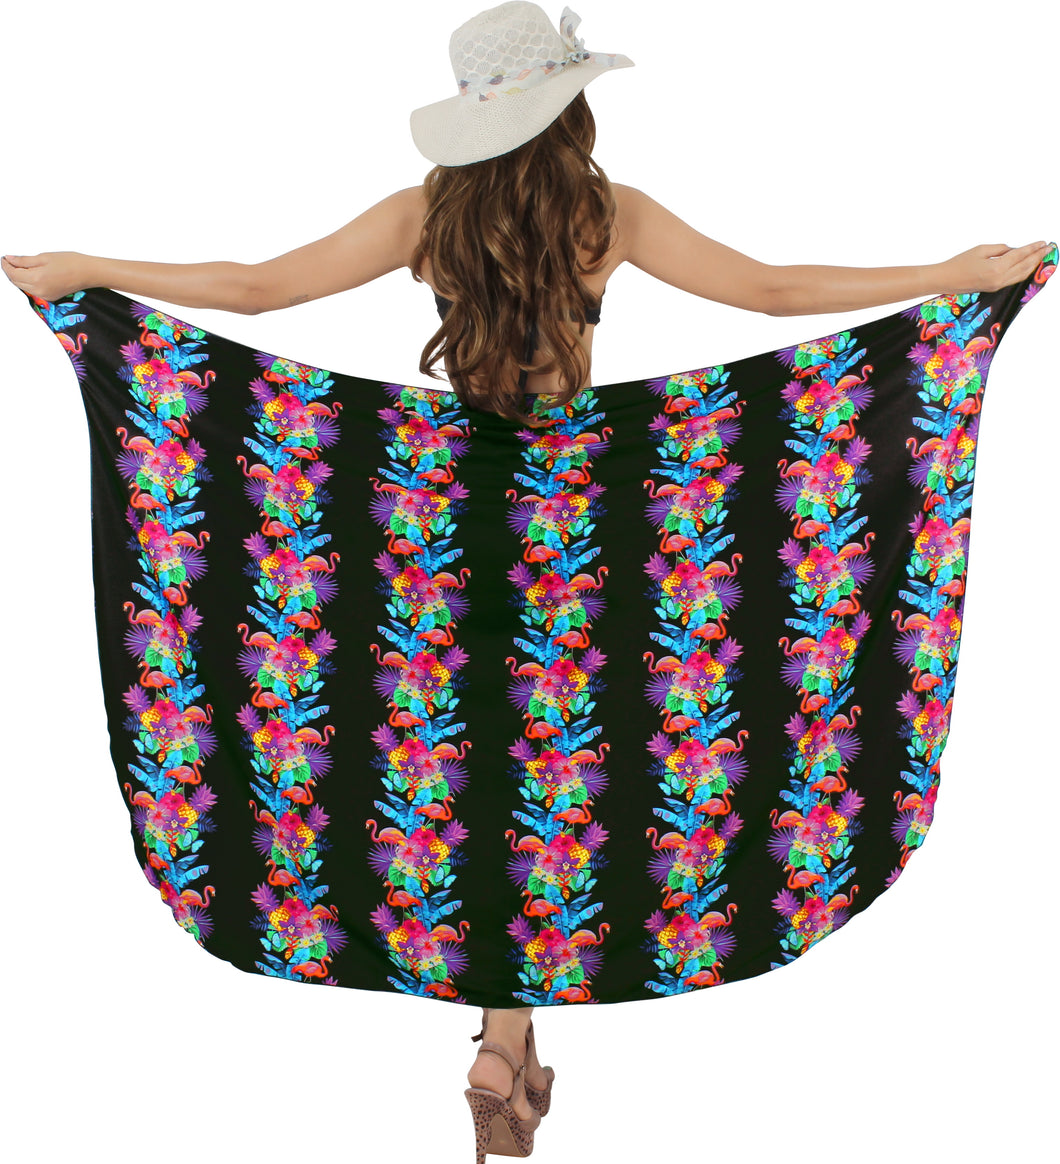 Non-Sheer Hibiscus Flower and Swan Print Beach Wrap For Women